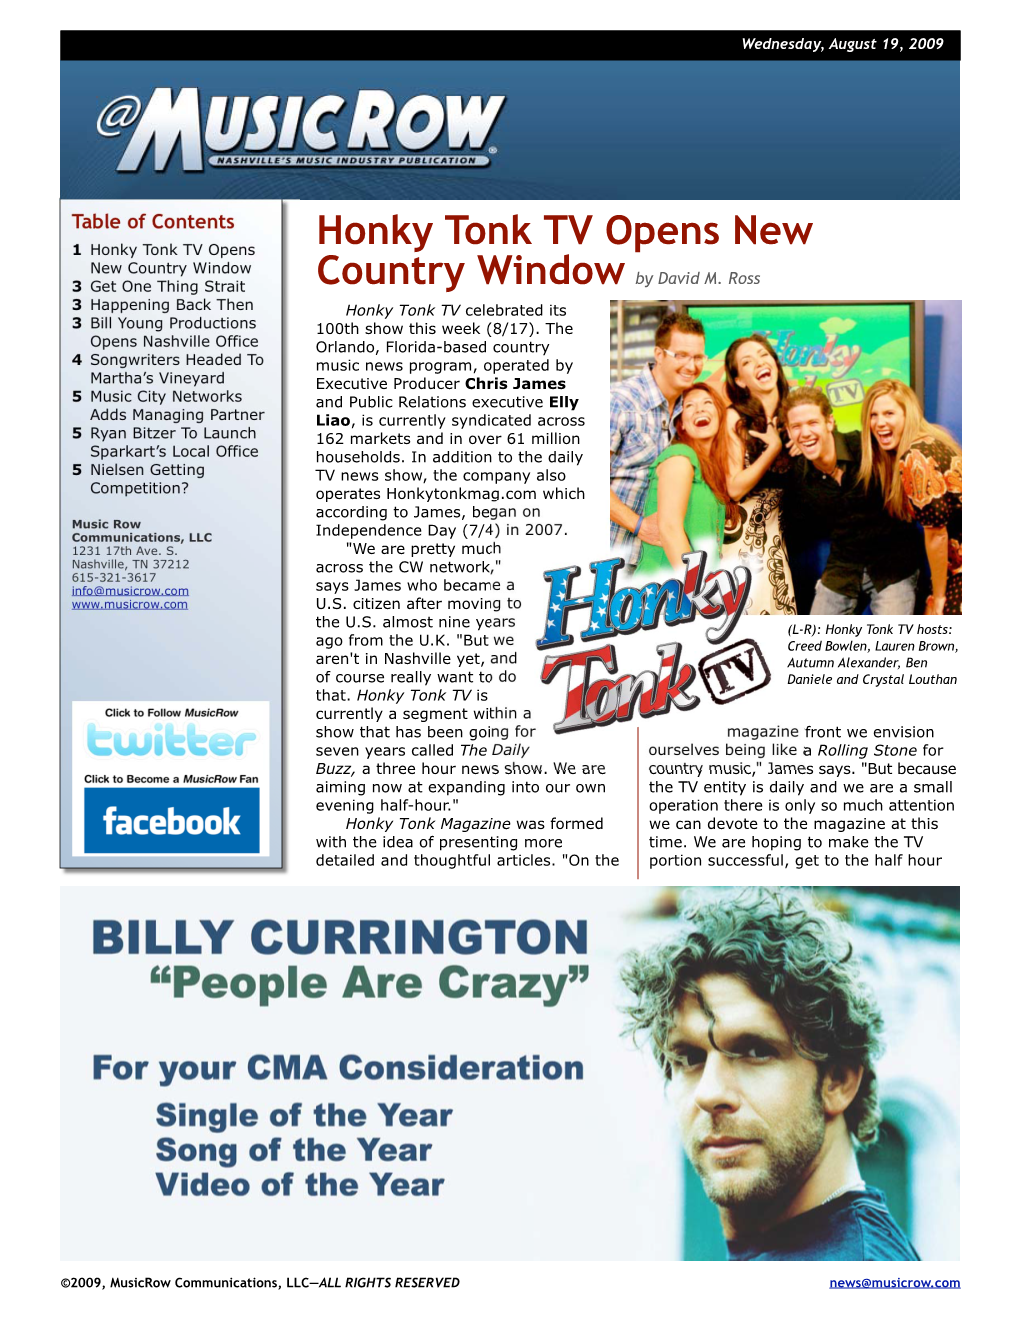 Honky Tonk TV Opens New Country Window by David M